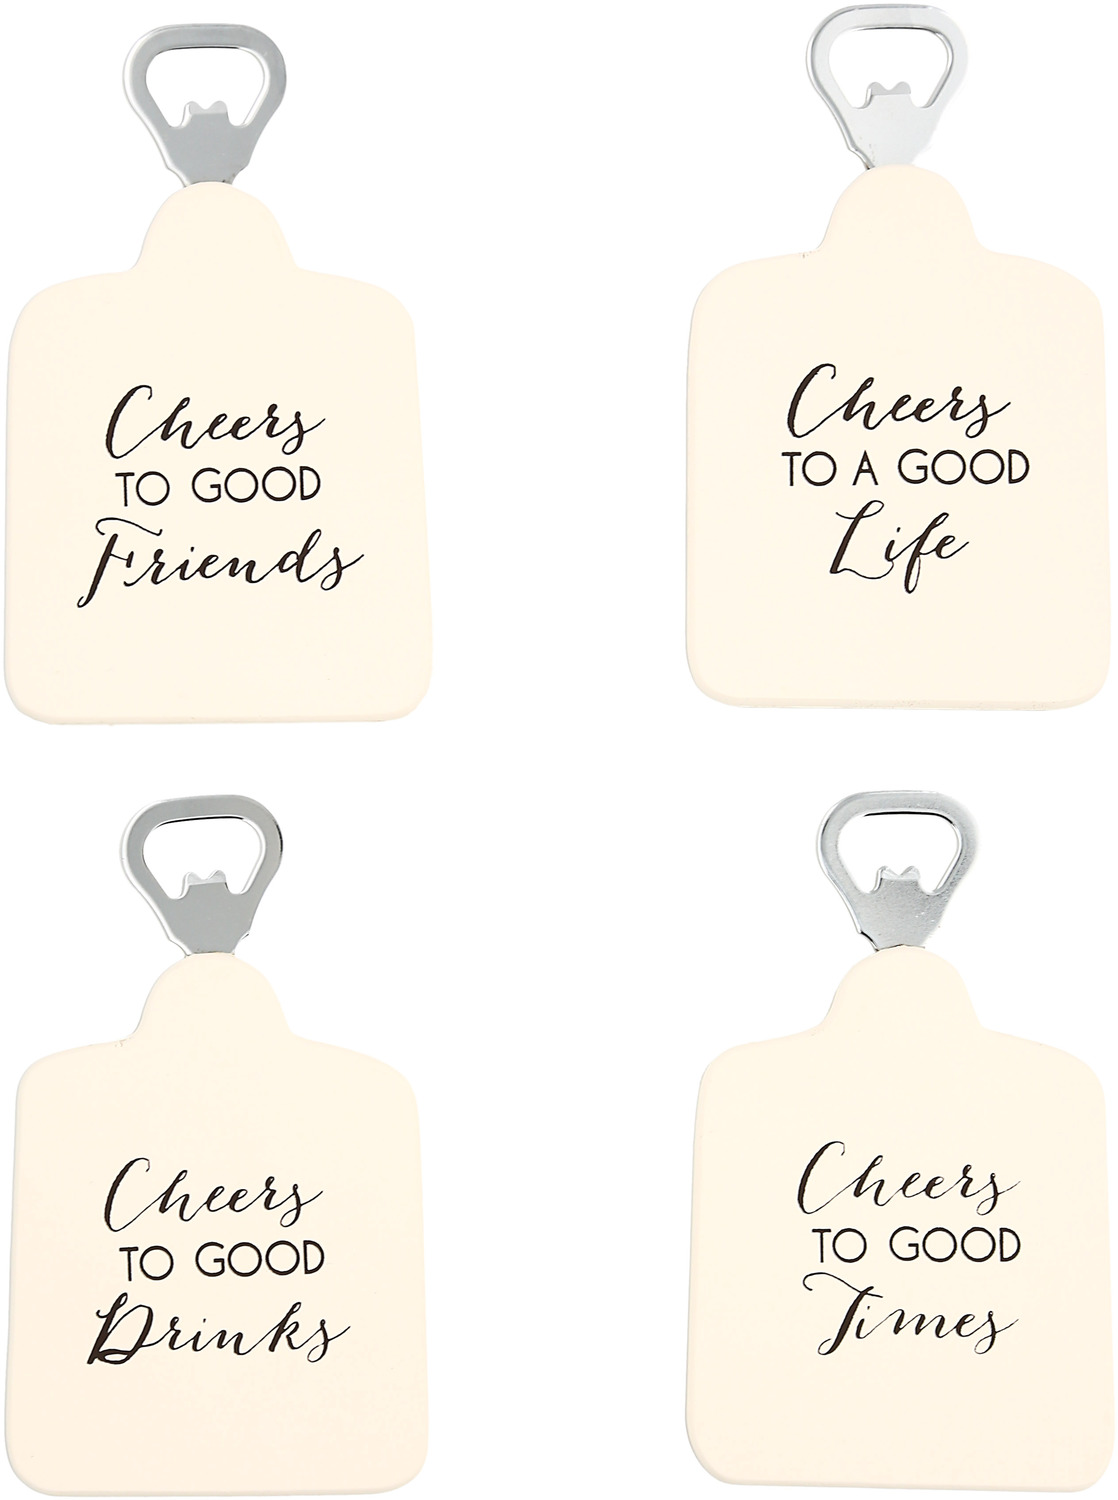 Cheers by Hostess with the Mostess - Cheers - Bottle Opener Coaster Set